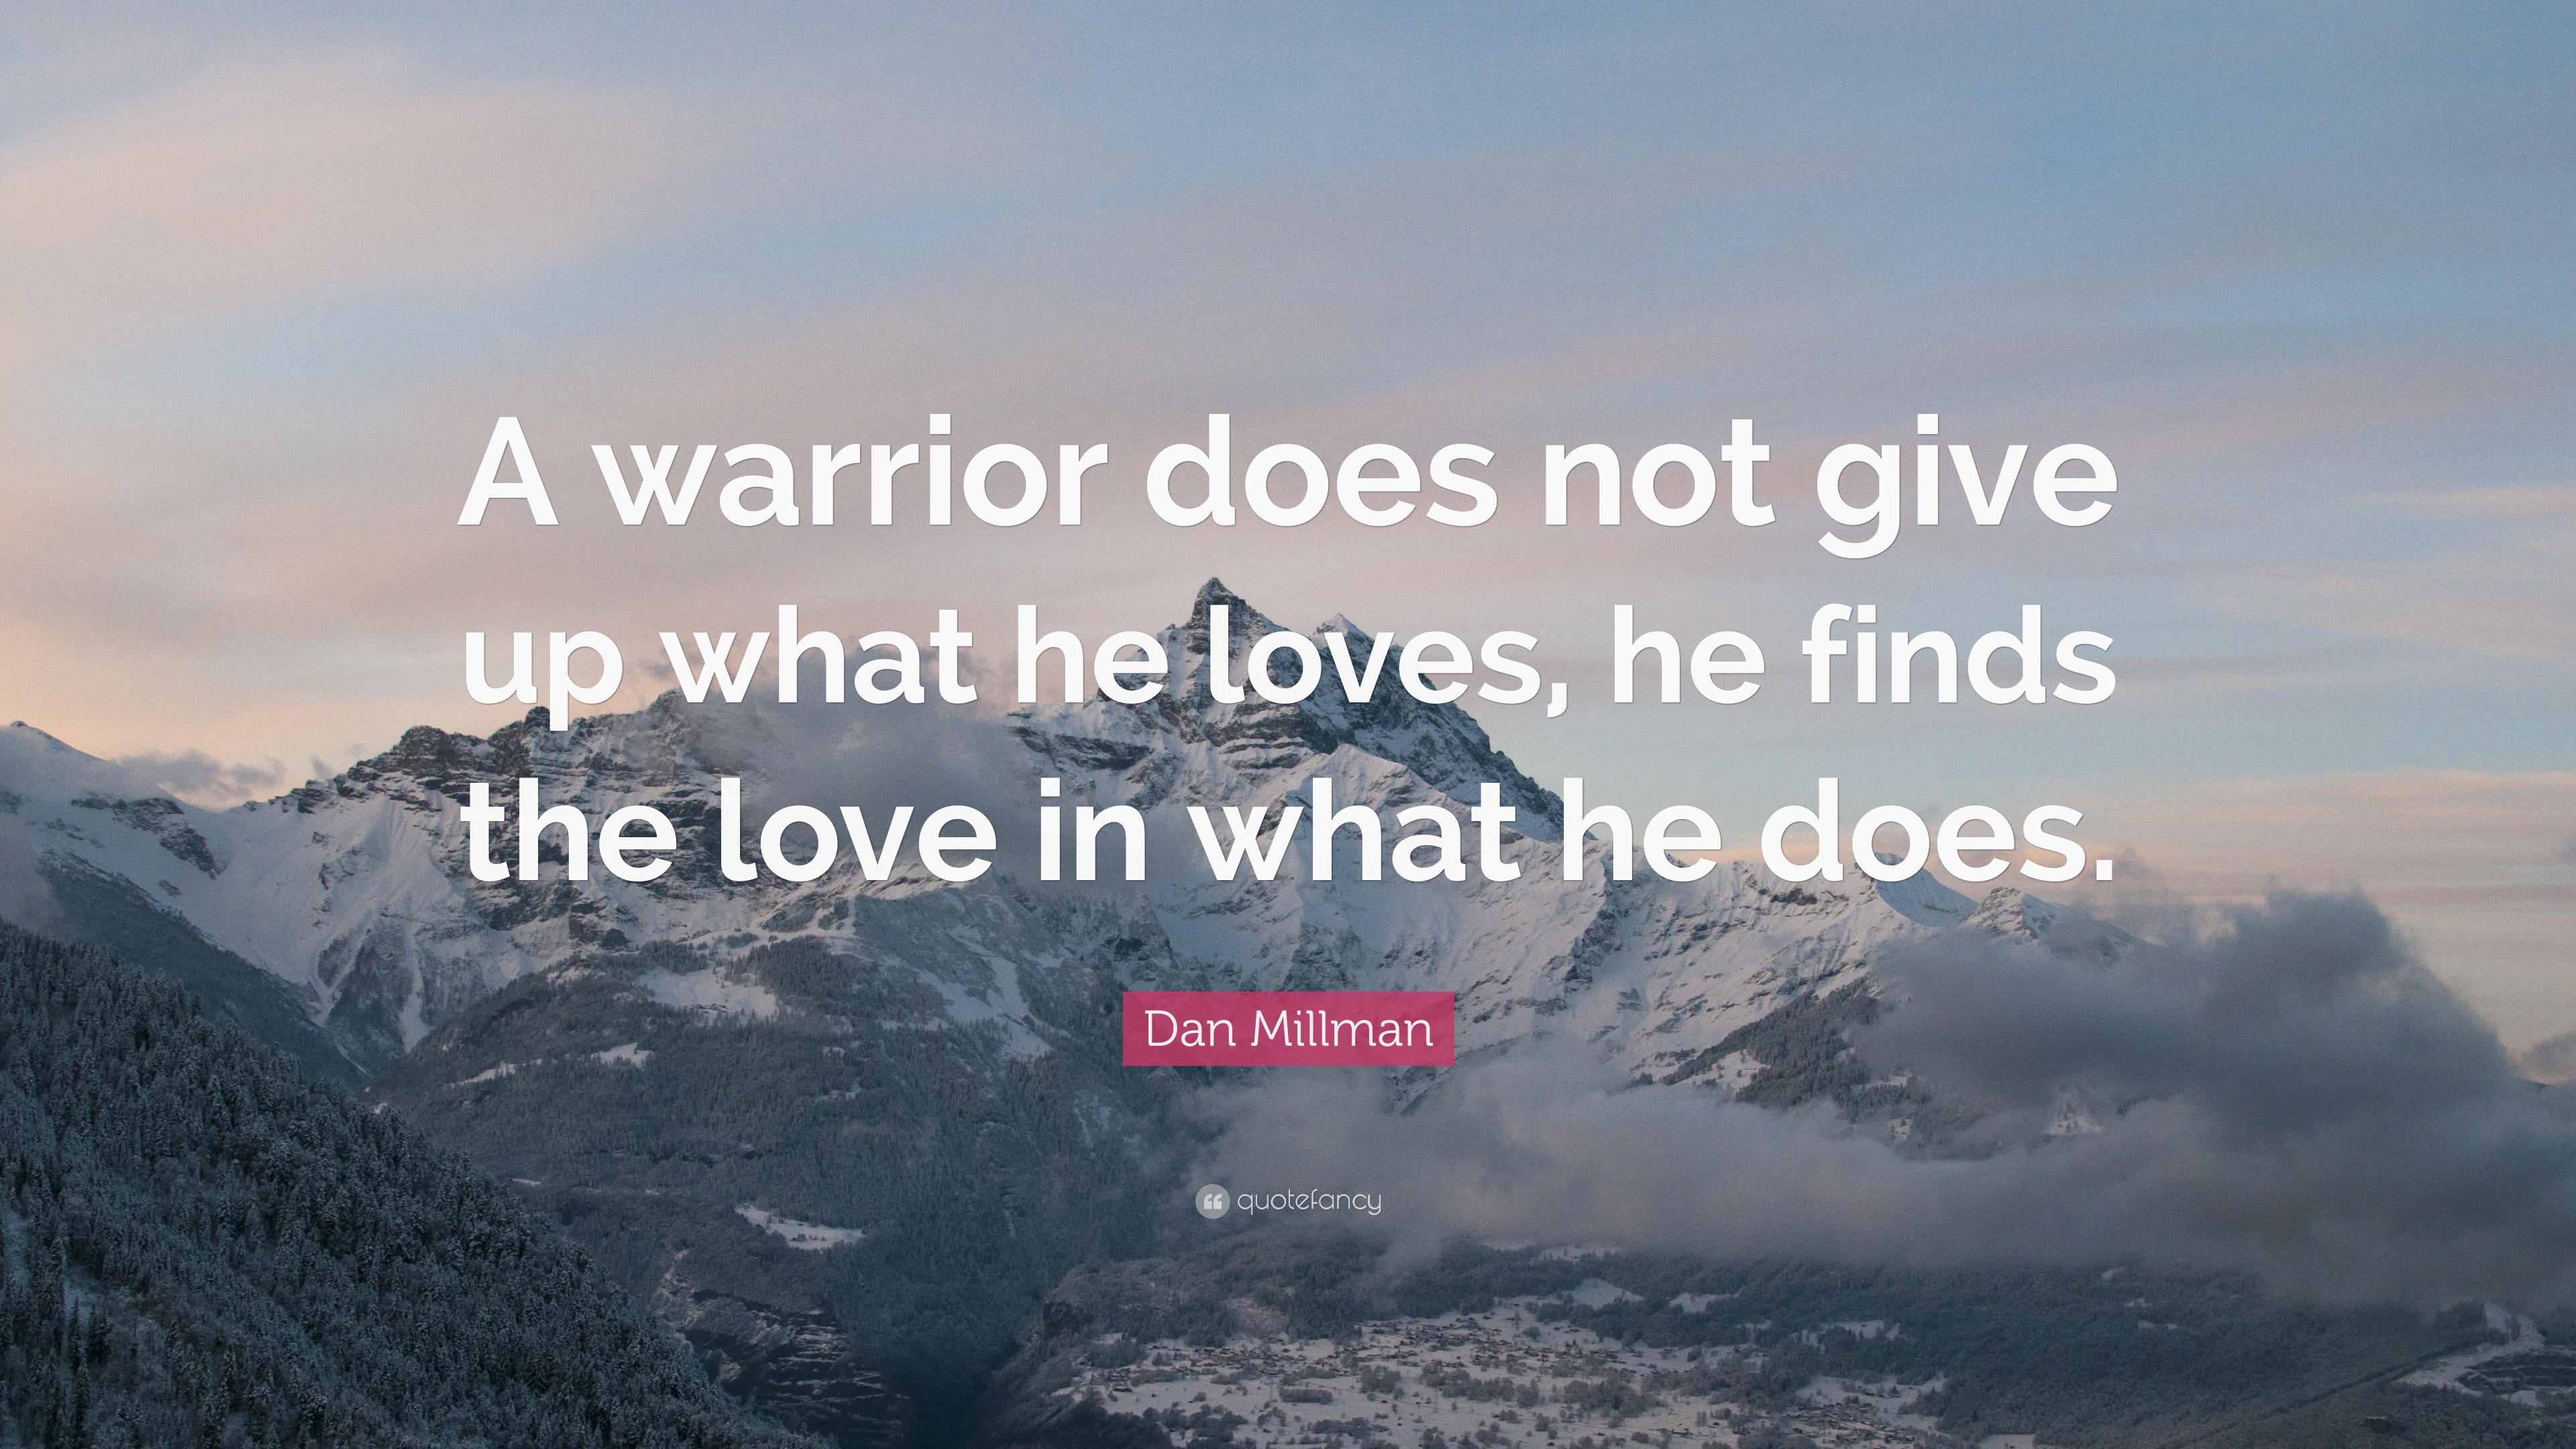 Dan Millman Quote A Warrior Does Not Give Up What He Loves He Finds The Love